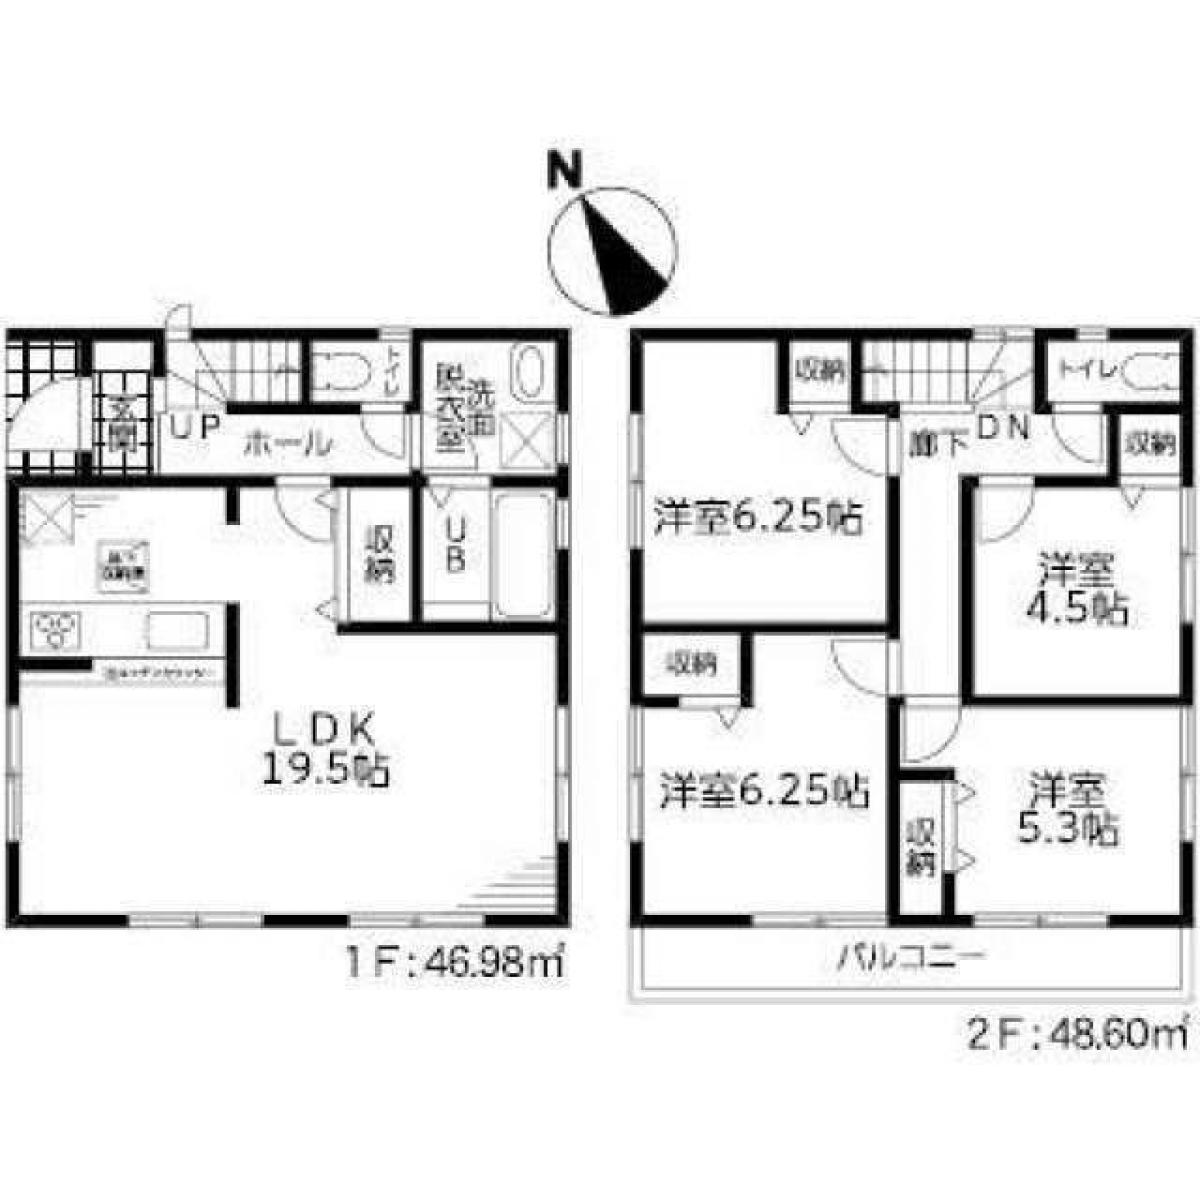 Picture of Home For Sale in Adachi Ku, Tokyo, Japan